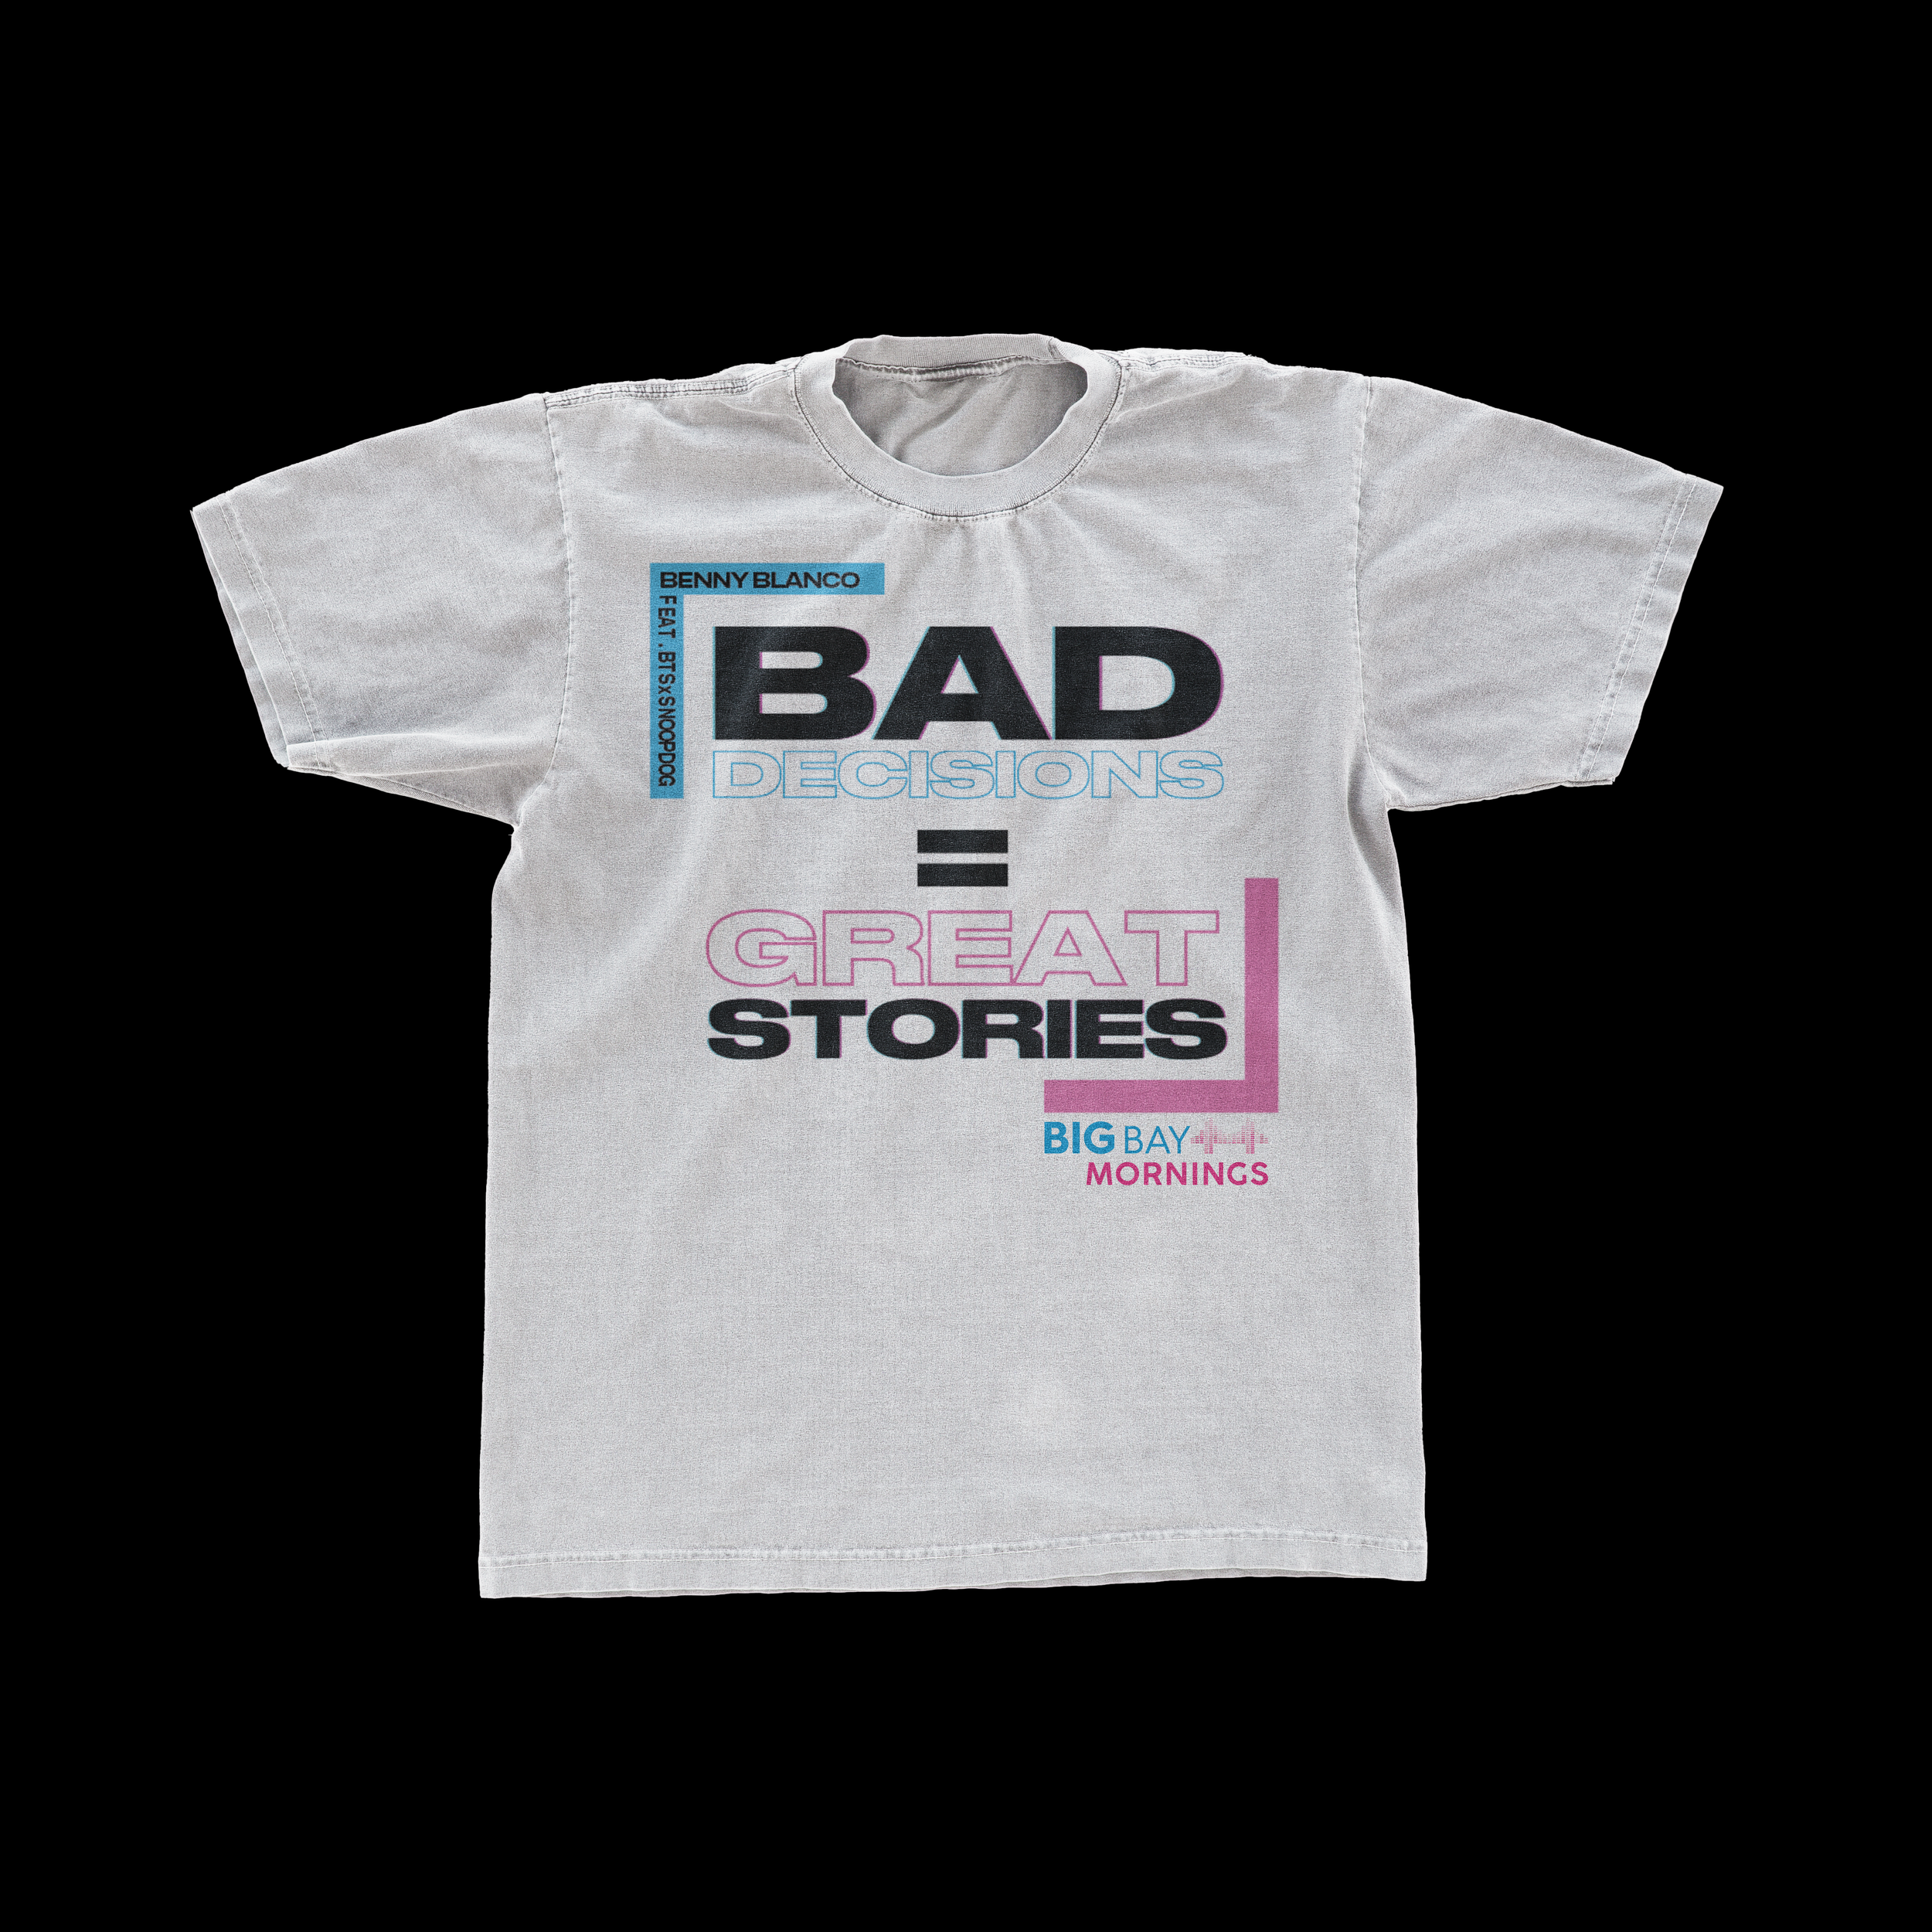 BAD DECISIONS MOCK UP WHITE SHIRT.png